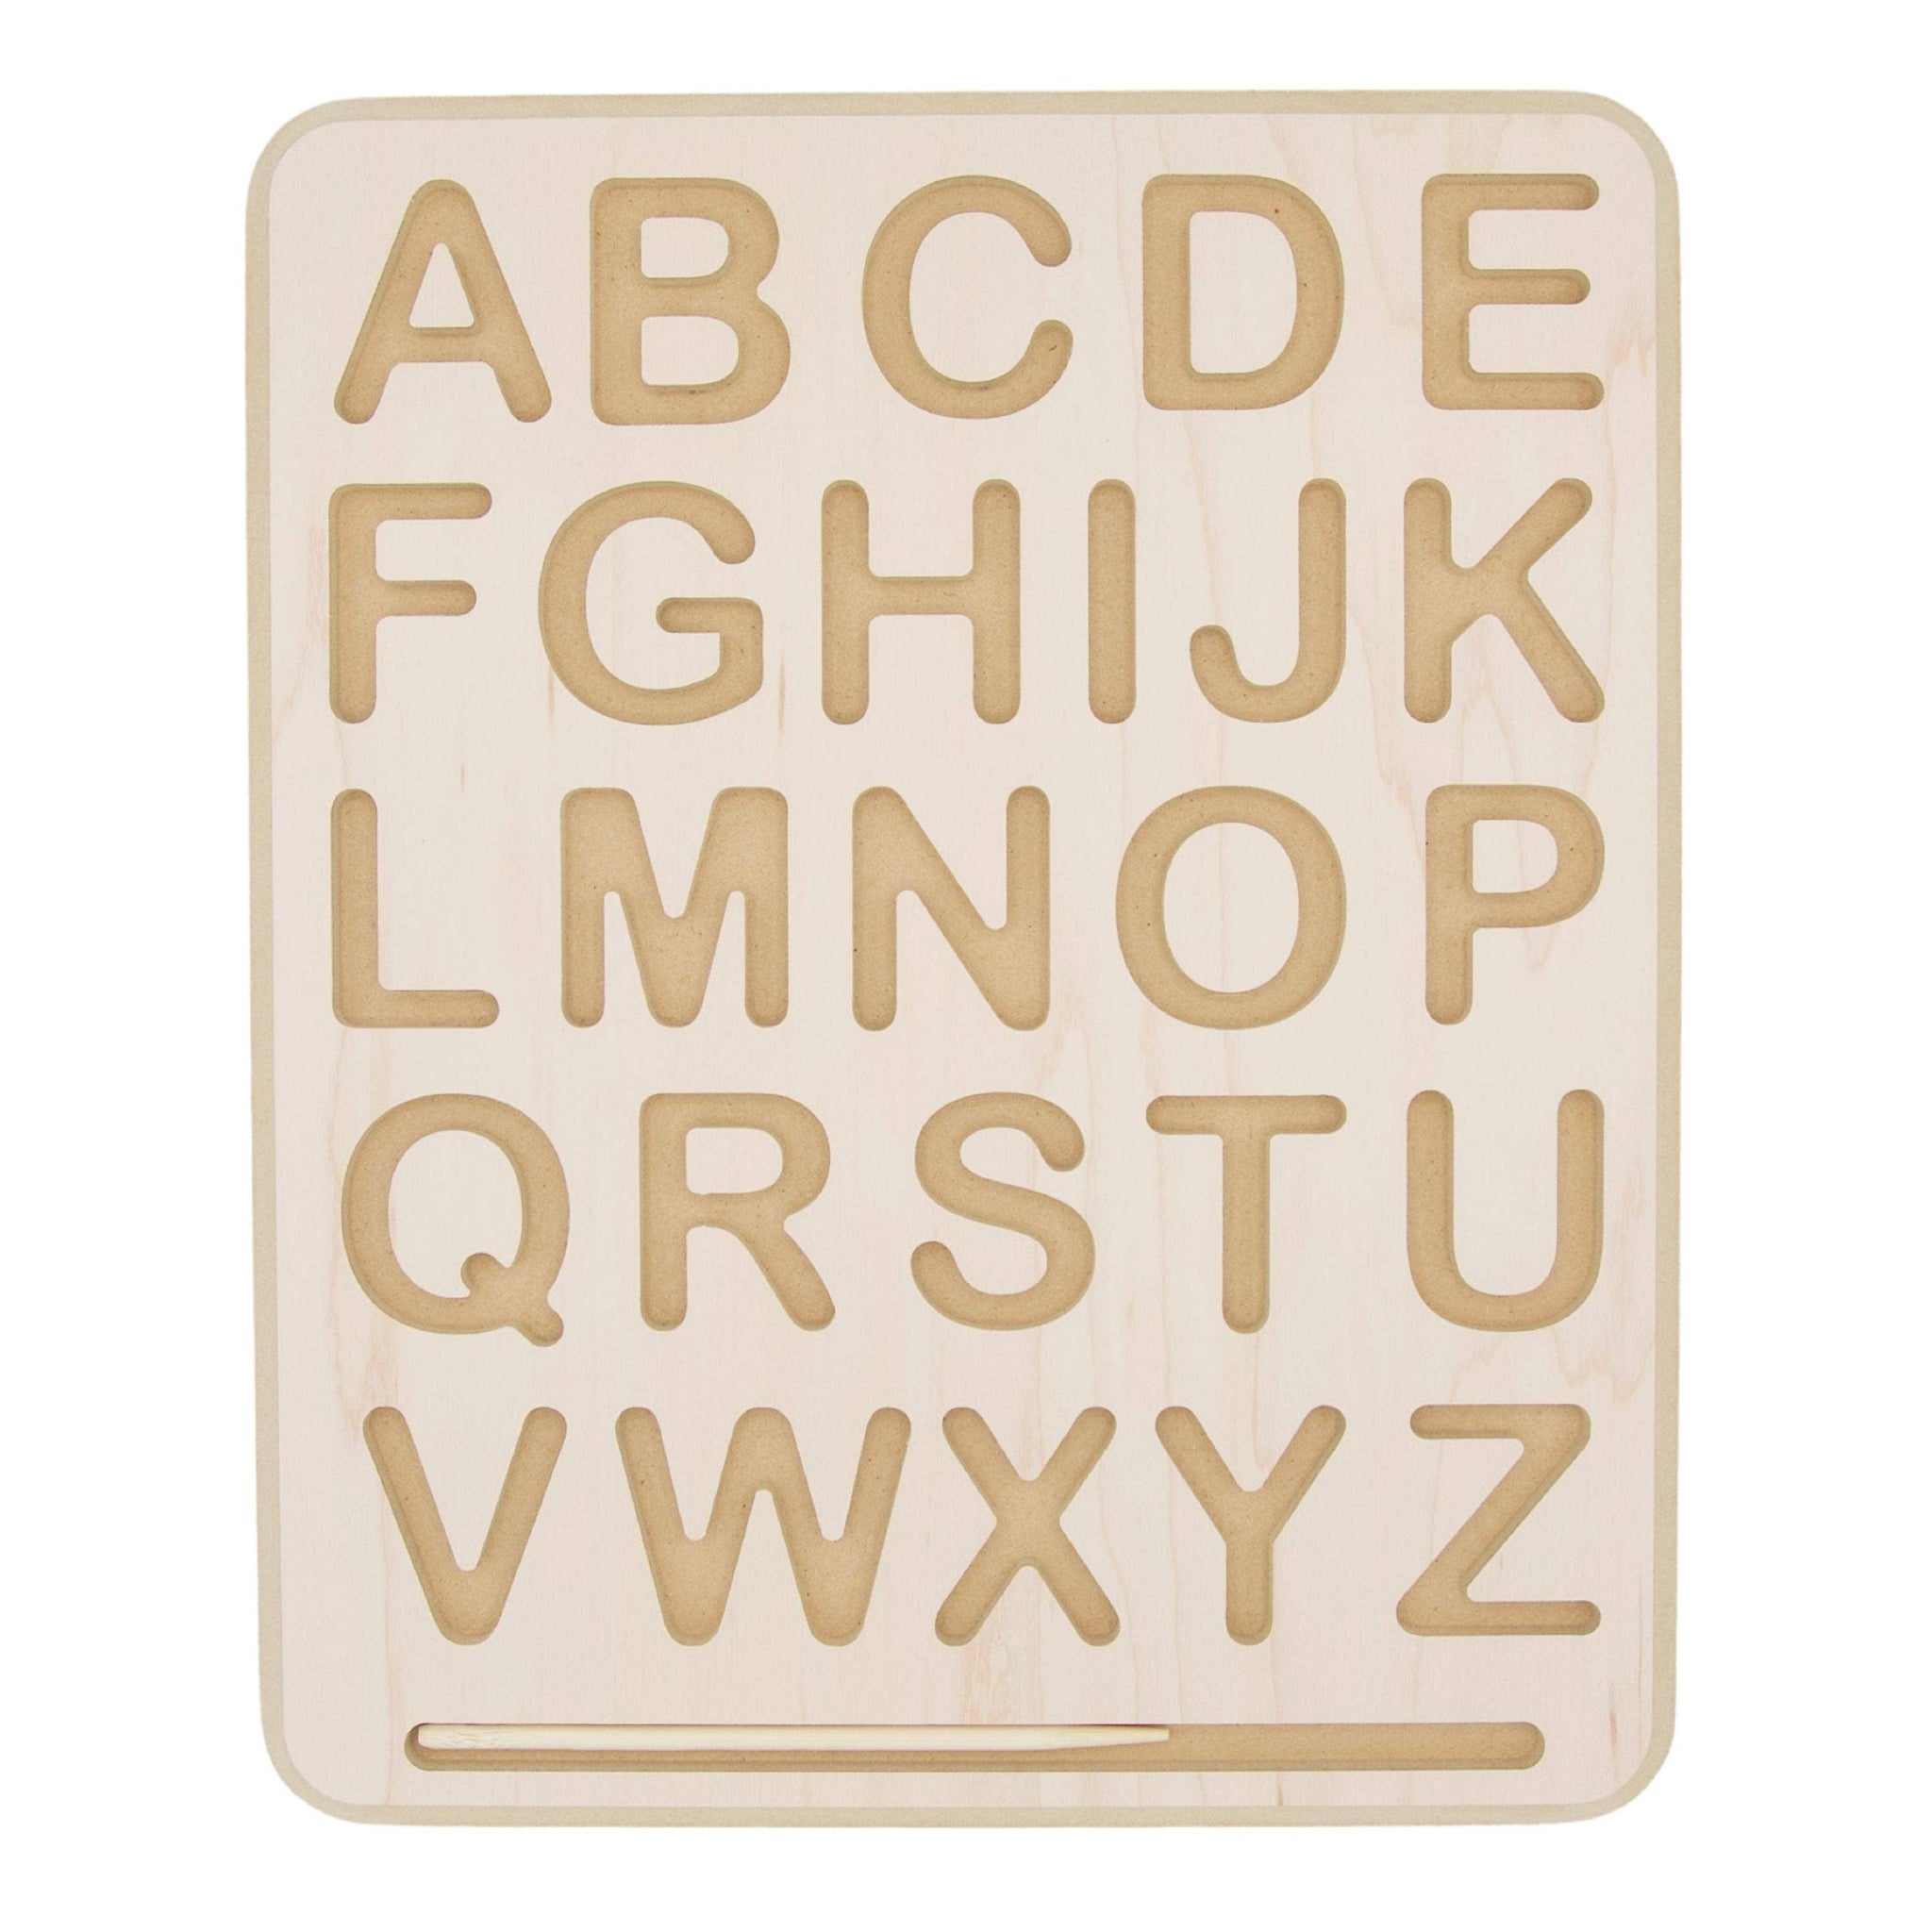 Wooden Uppercase Alphabet & Numbers Tracing Boards w/ Stylus